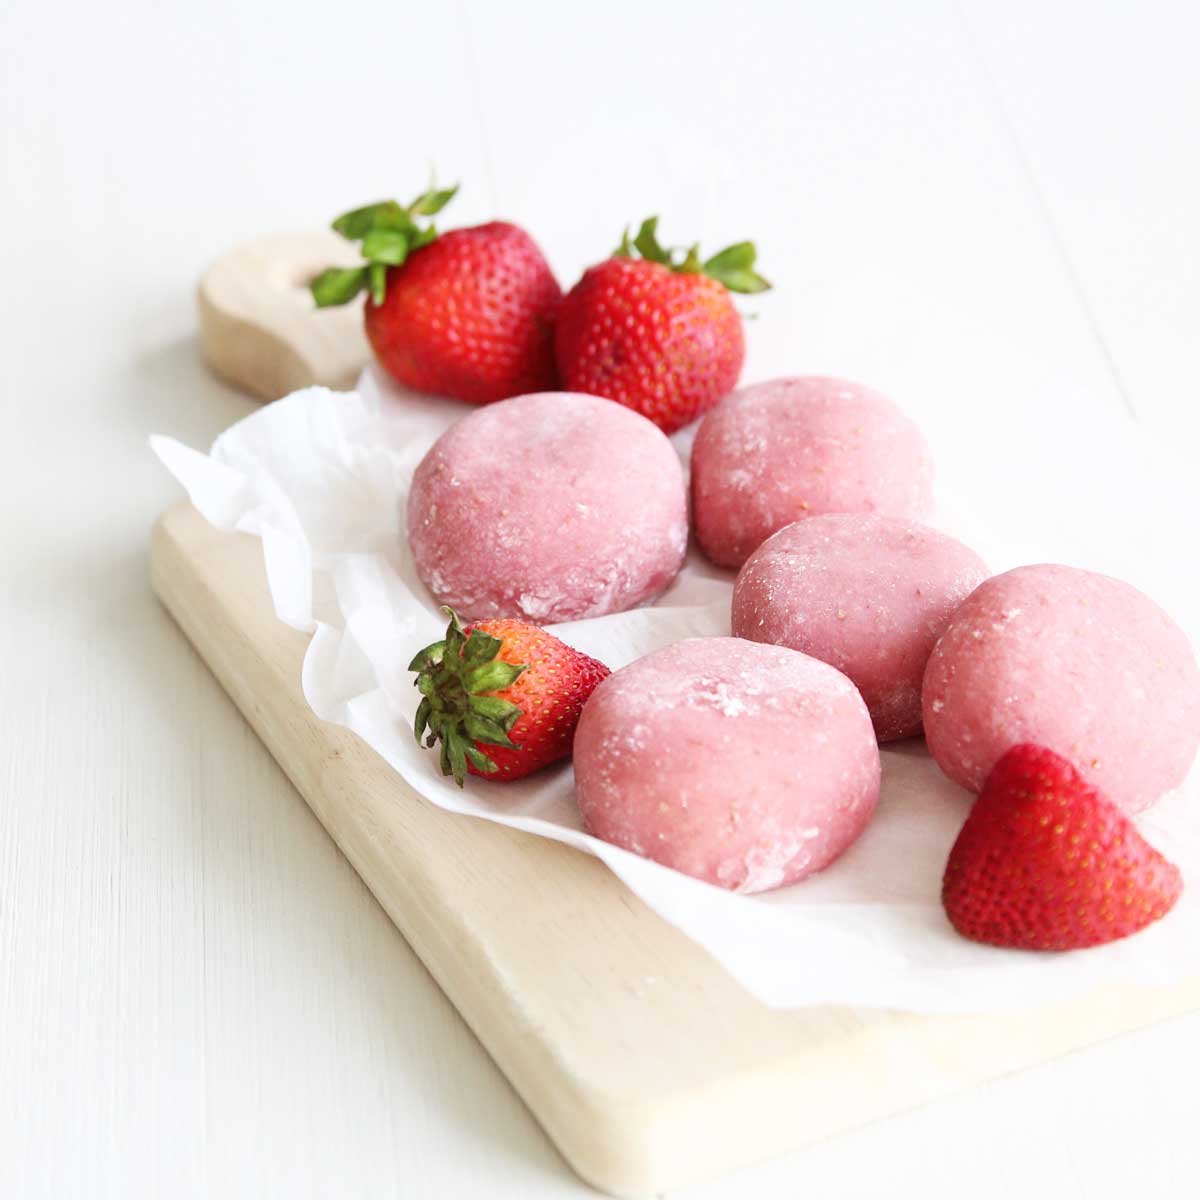 How to Make Healthy Strawberry Mochi (Made in the Microwave) - Walnut Butter Mooncakes